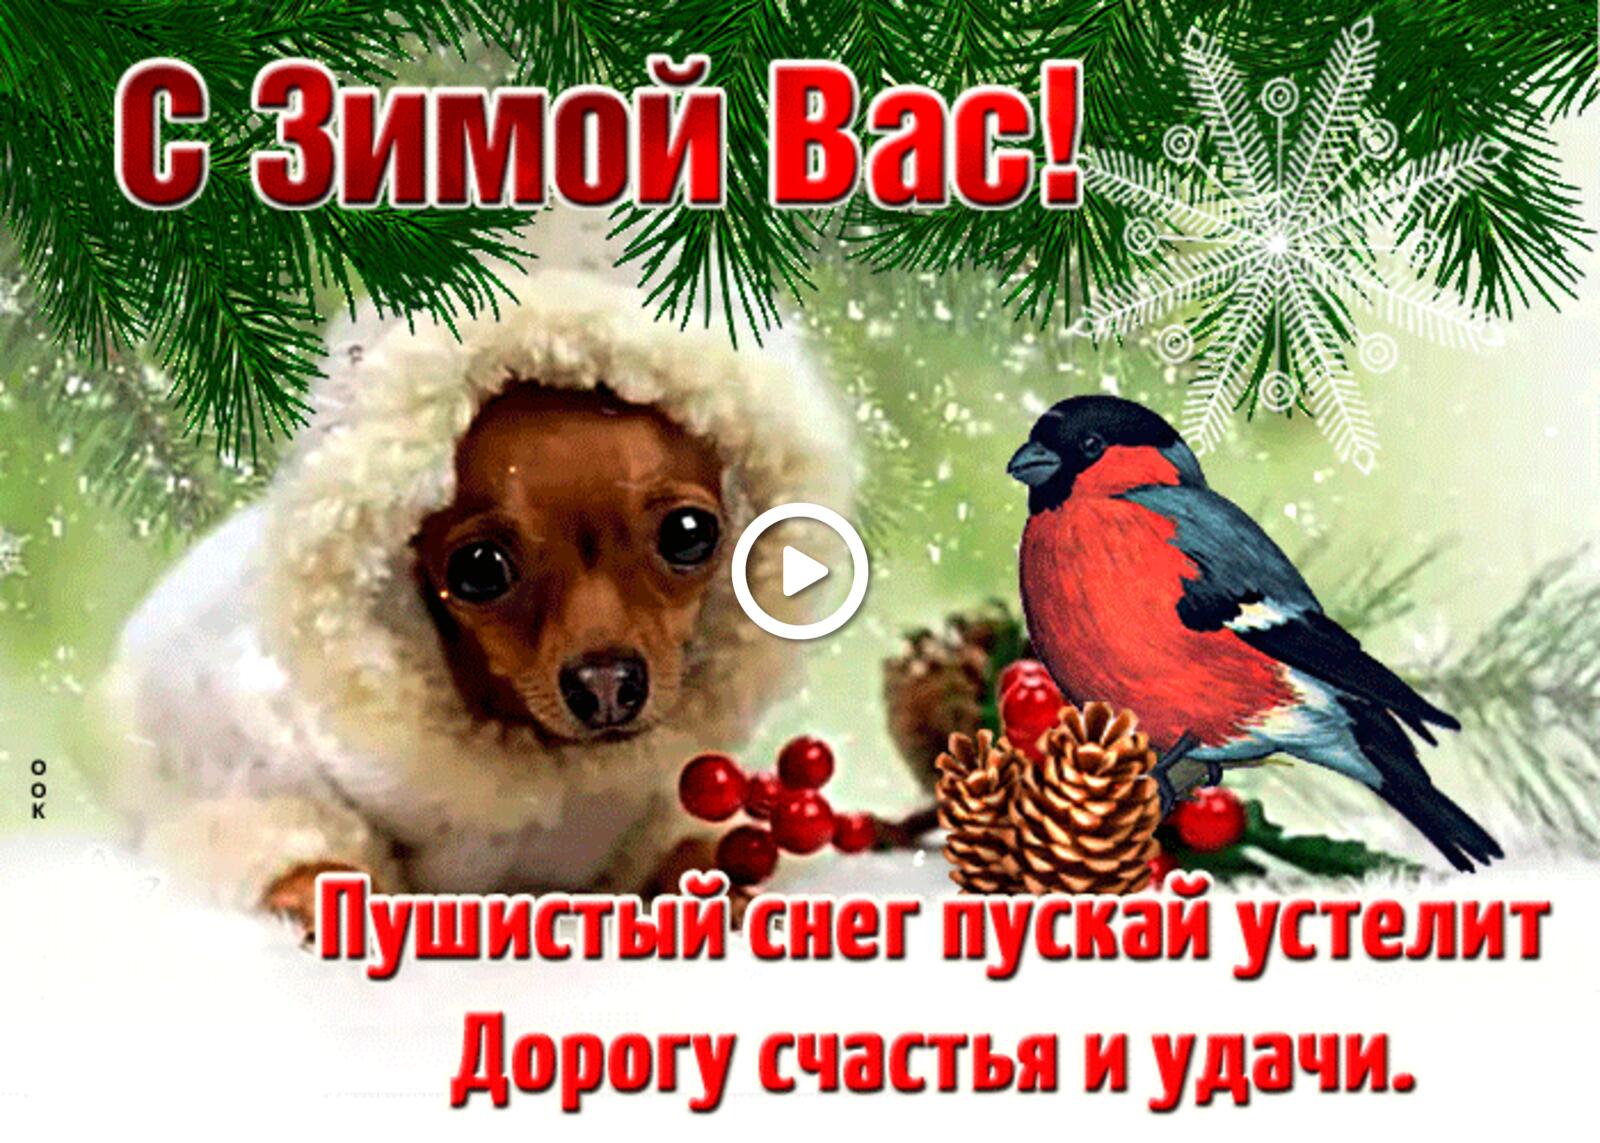 A postcard on the subject of with winter you happiness and good luck dog for free